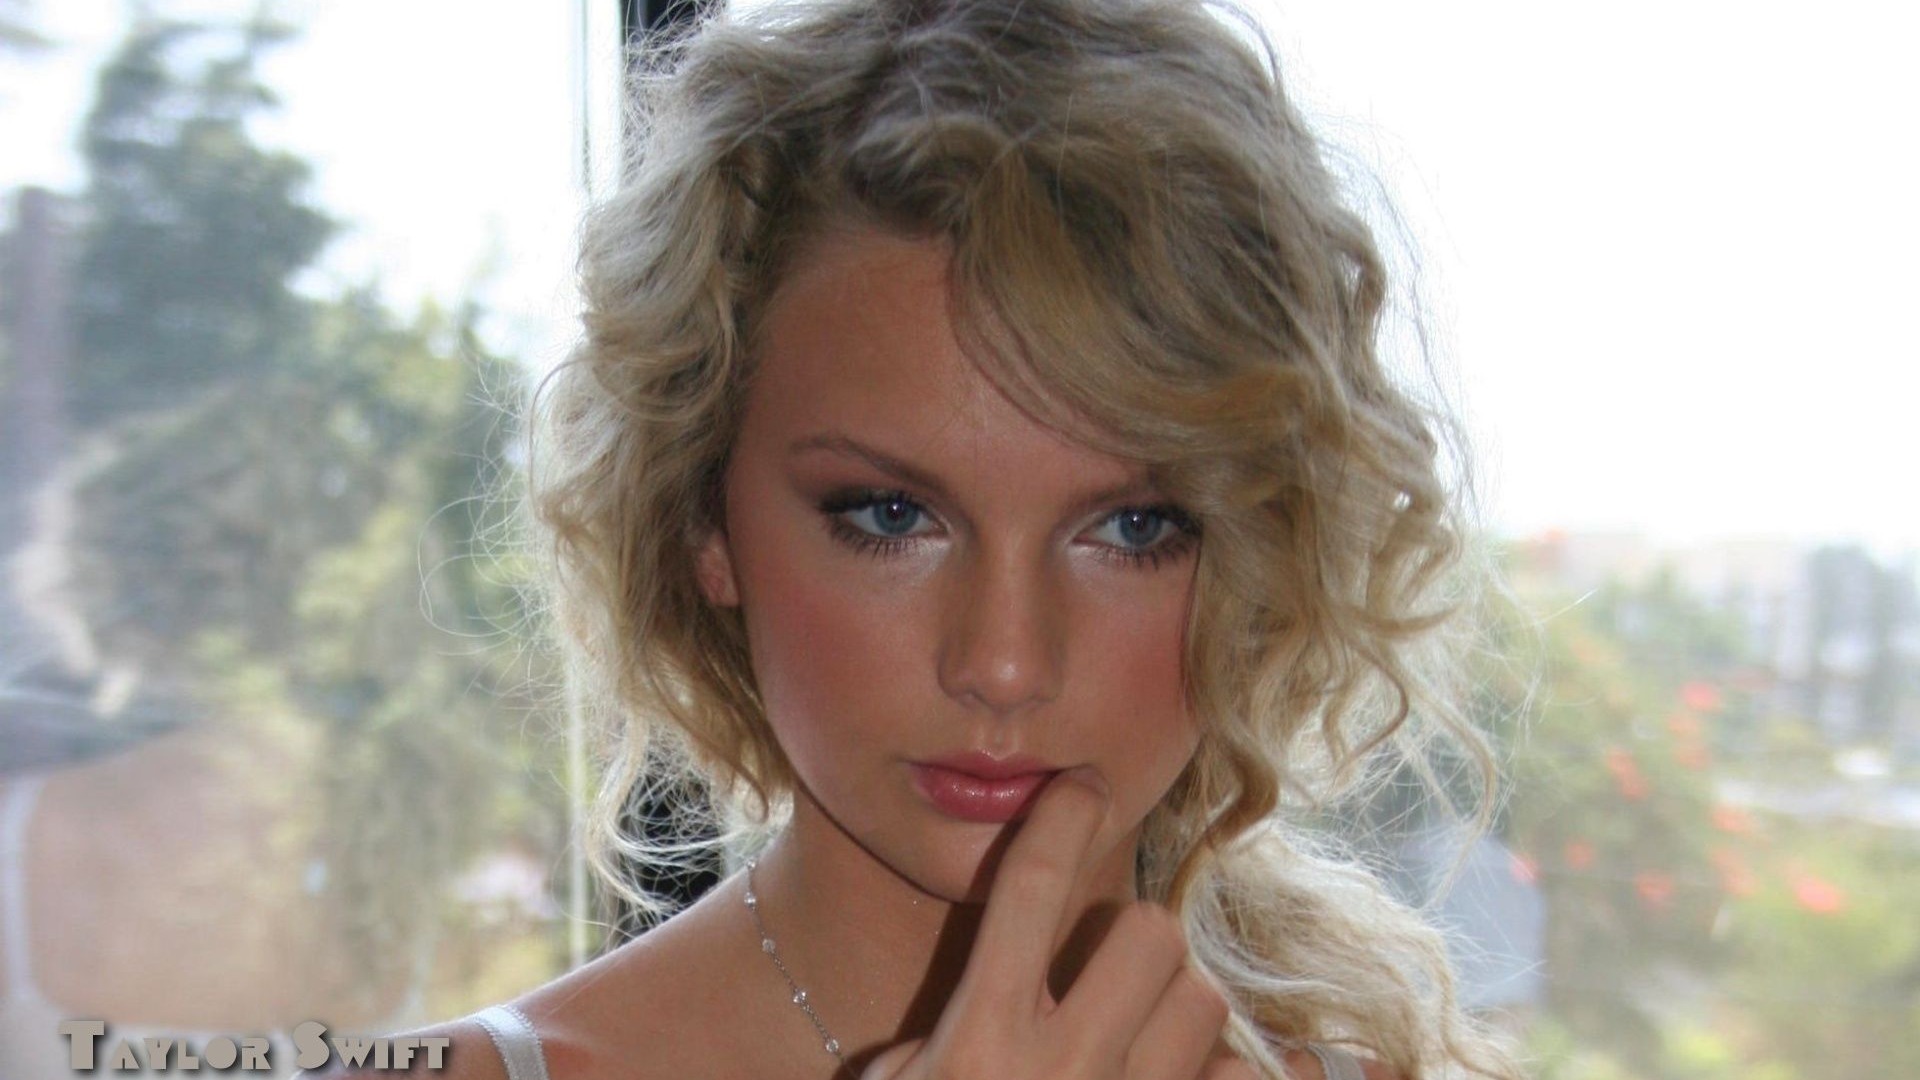 Taylor Swift #074 - 1920x1080 Wallpapers Pictures Photos Images